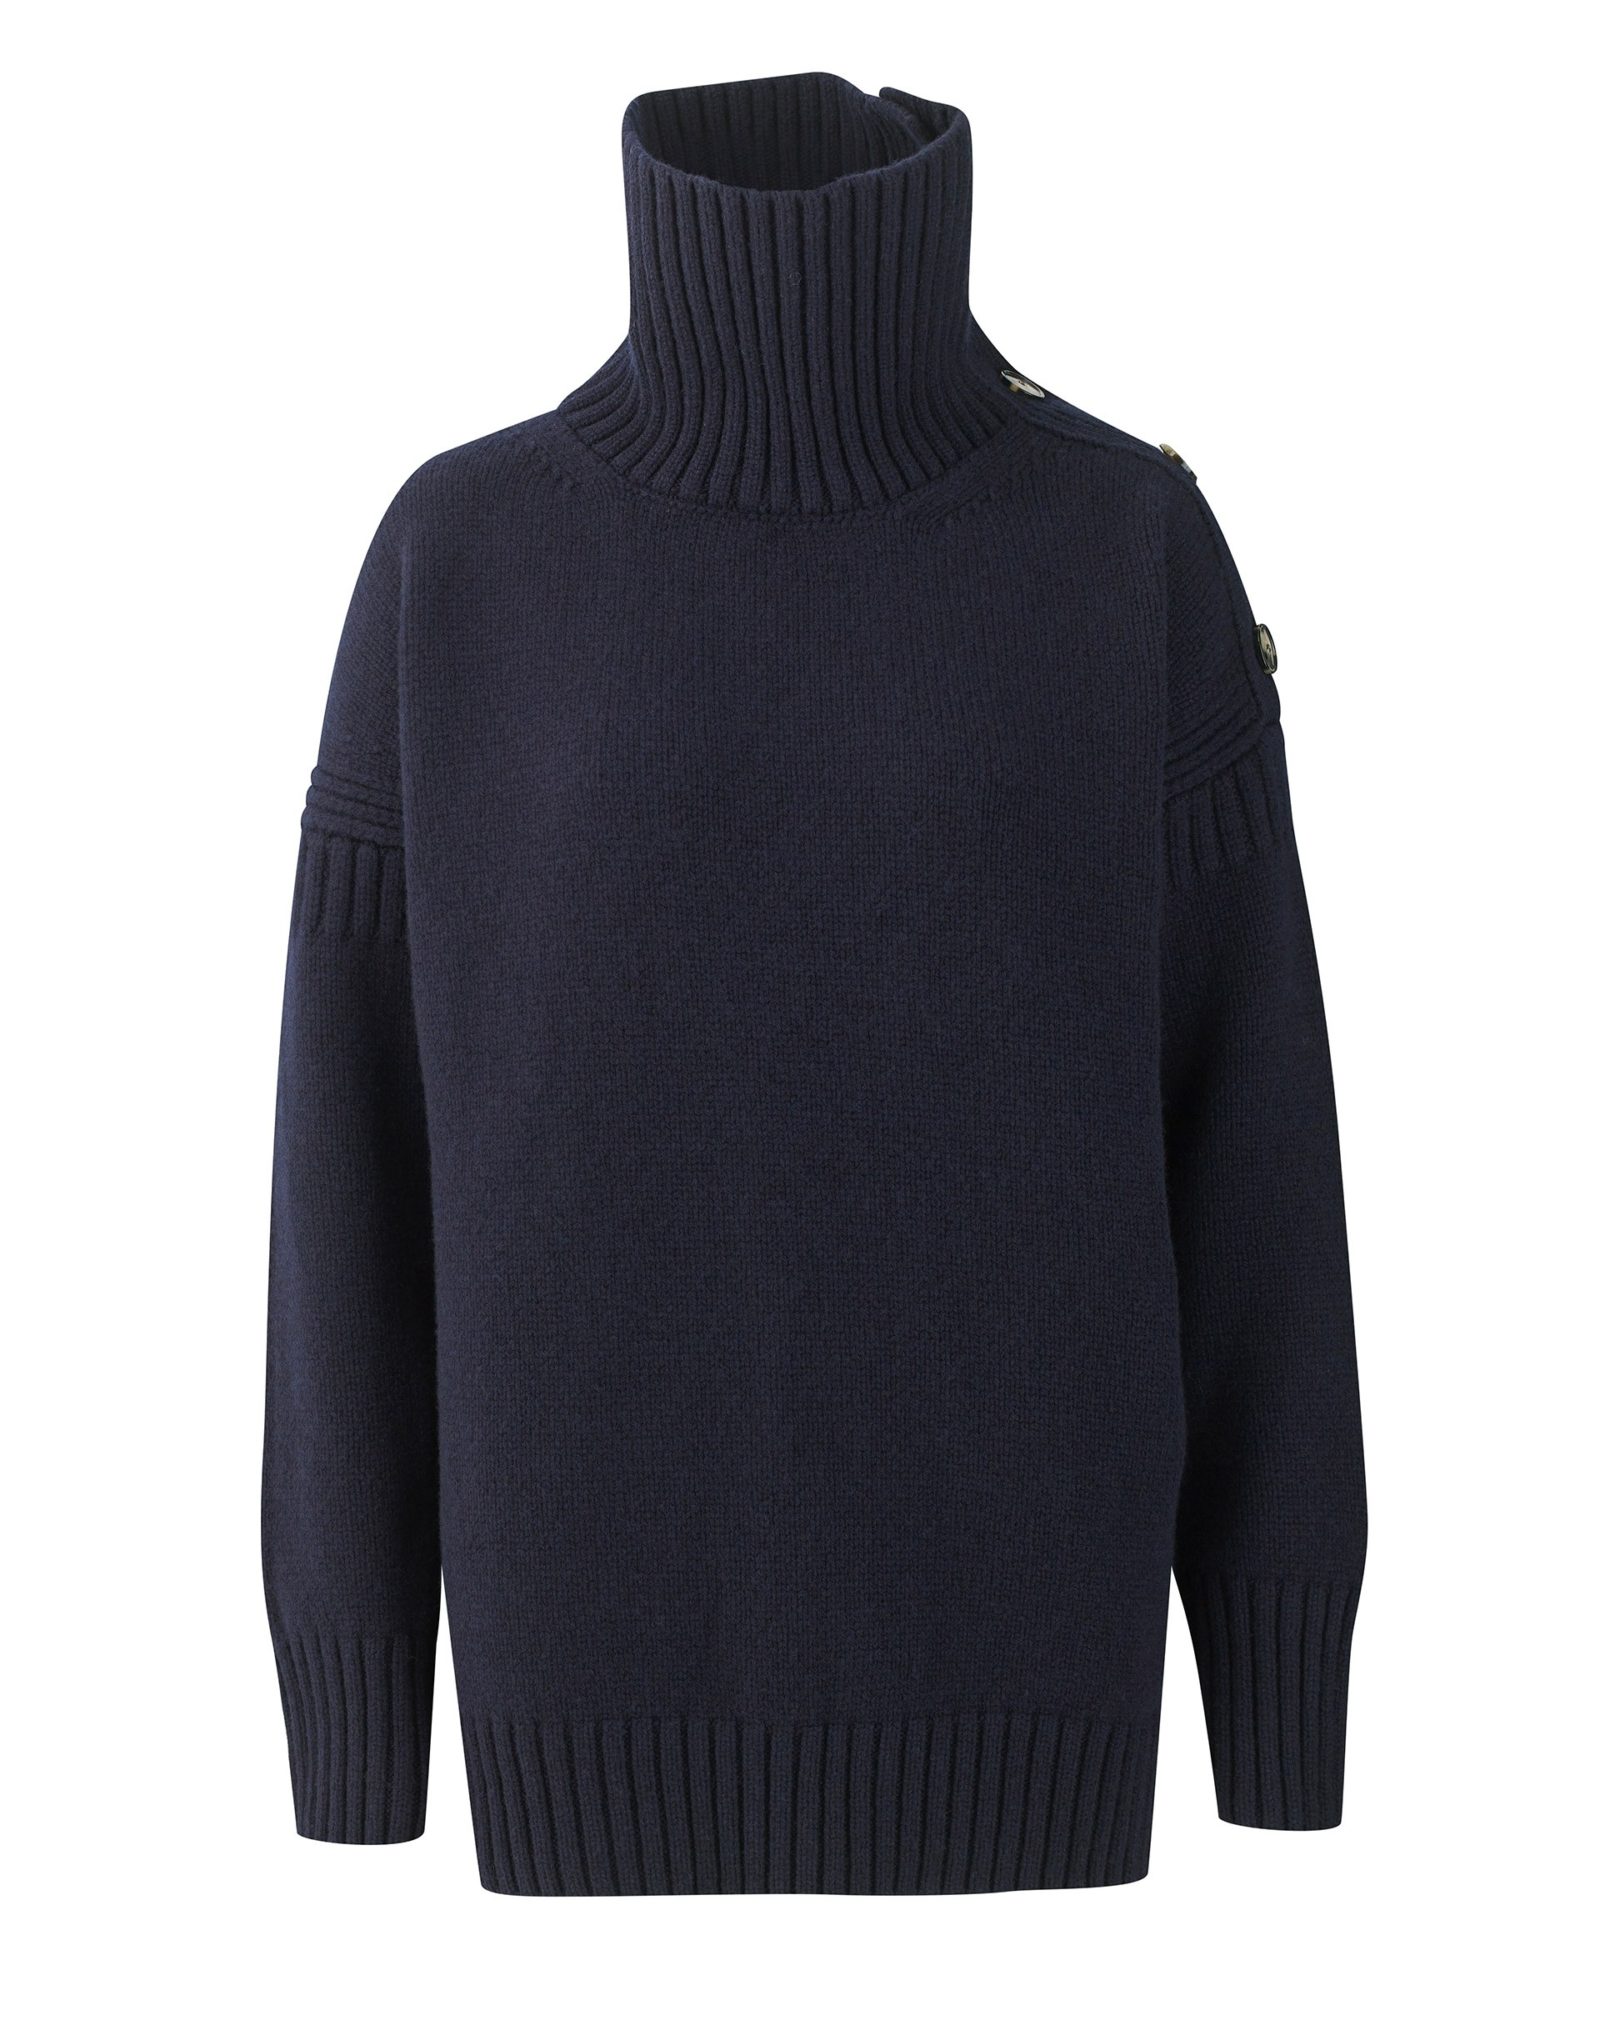 Winter sweaters, workhorses of our wardrobes - Chic at any age